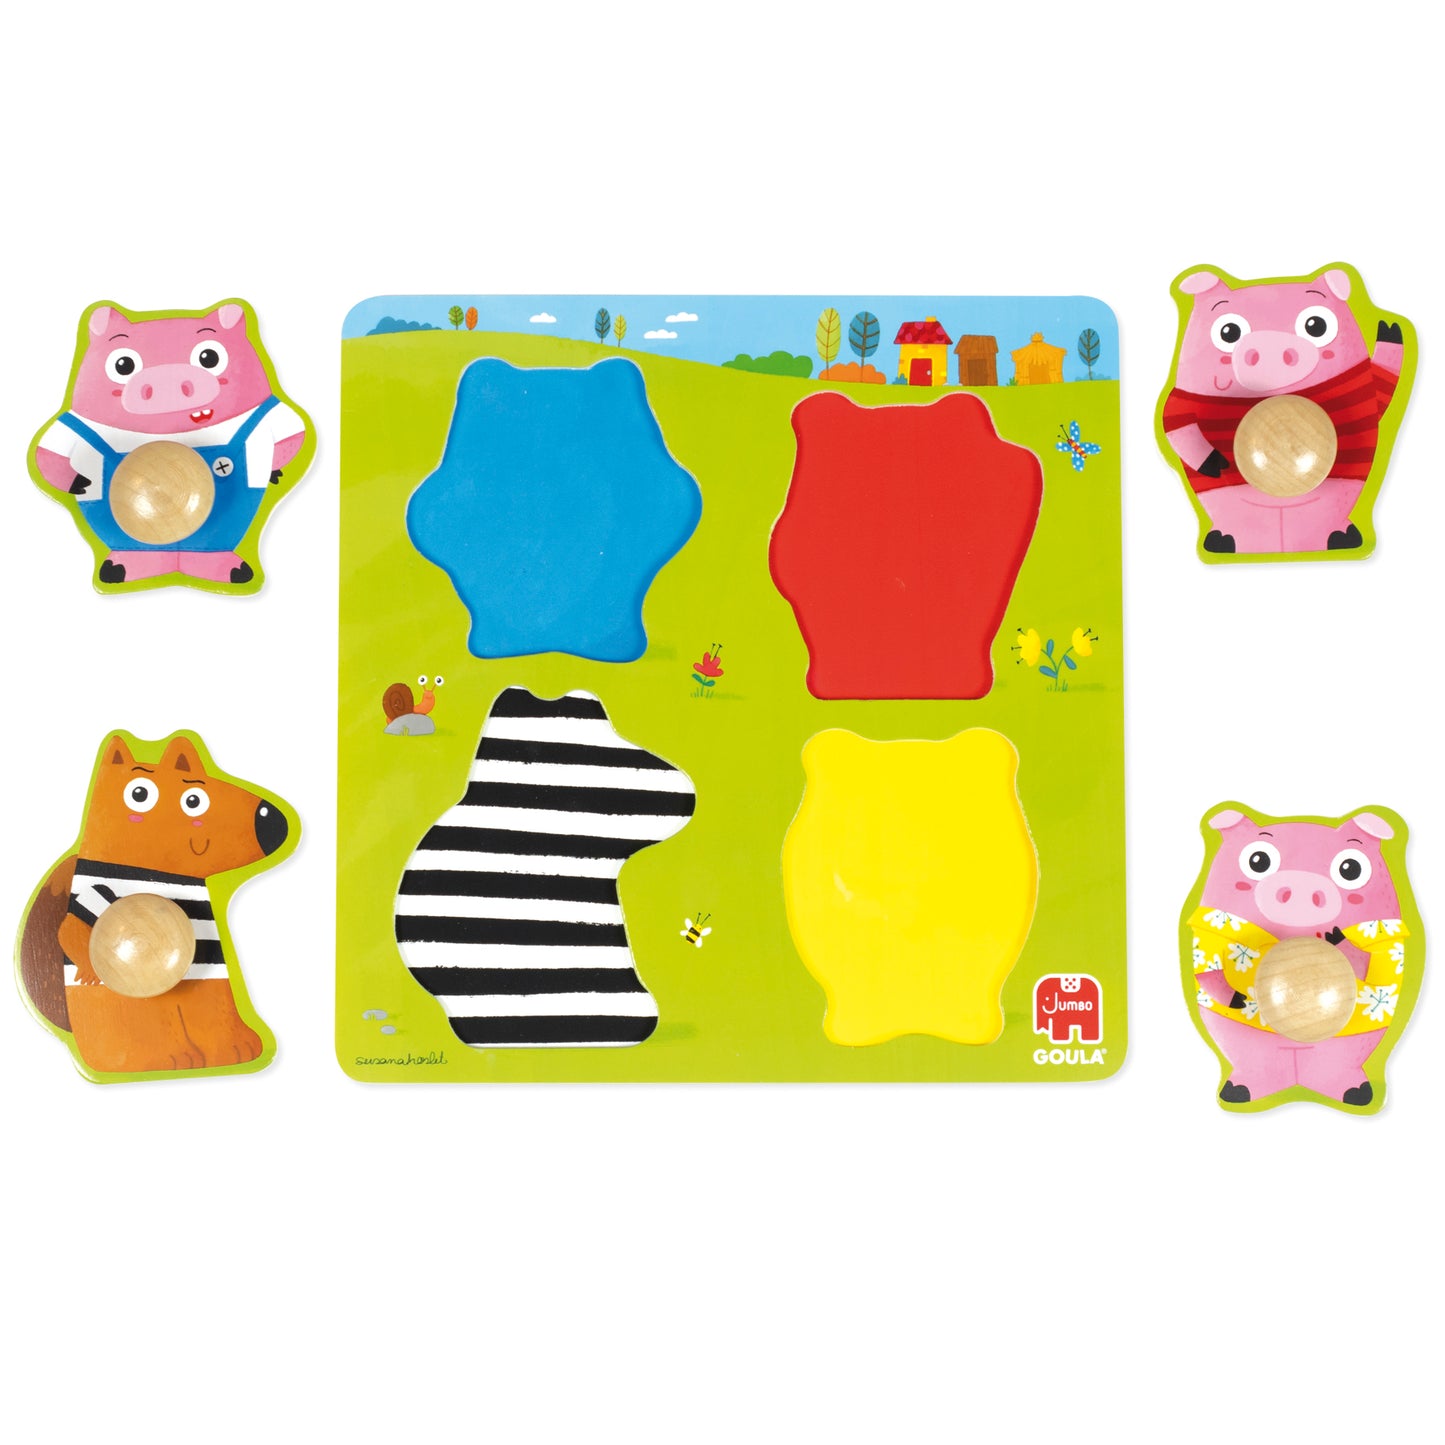 3 Little Pigs Puzzle - product image - Jumboplay.com